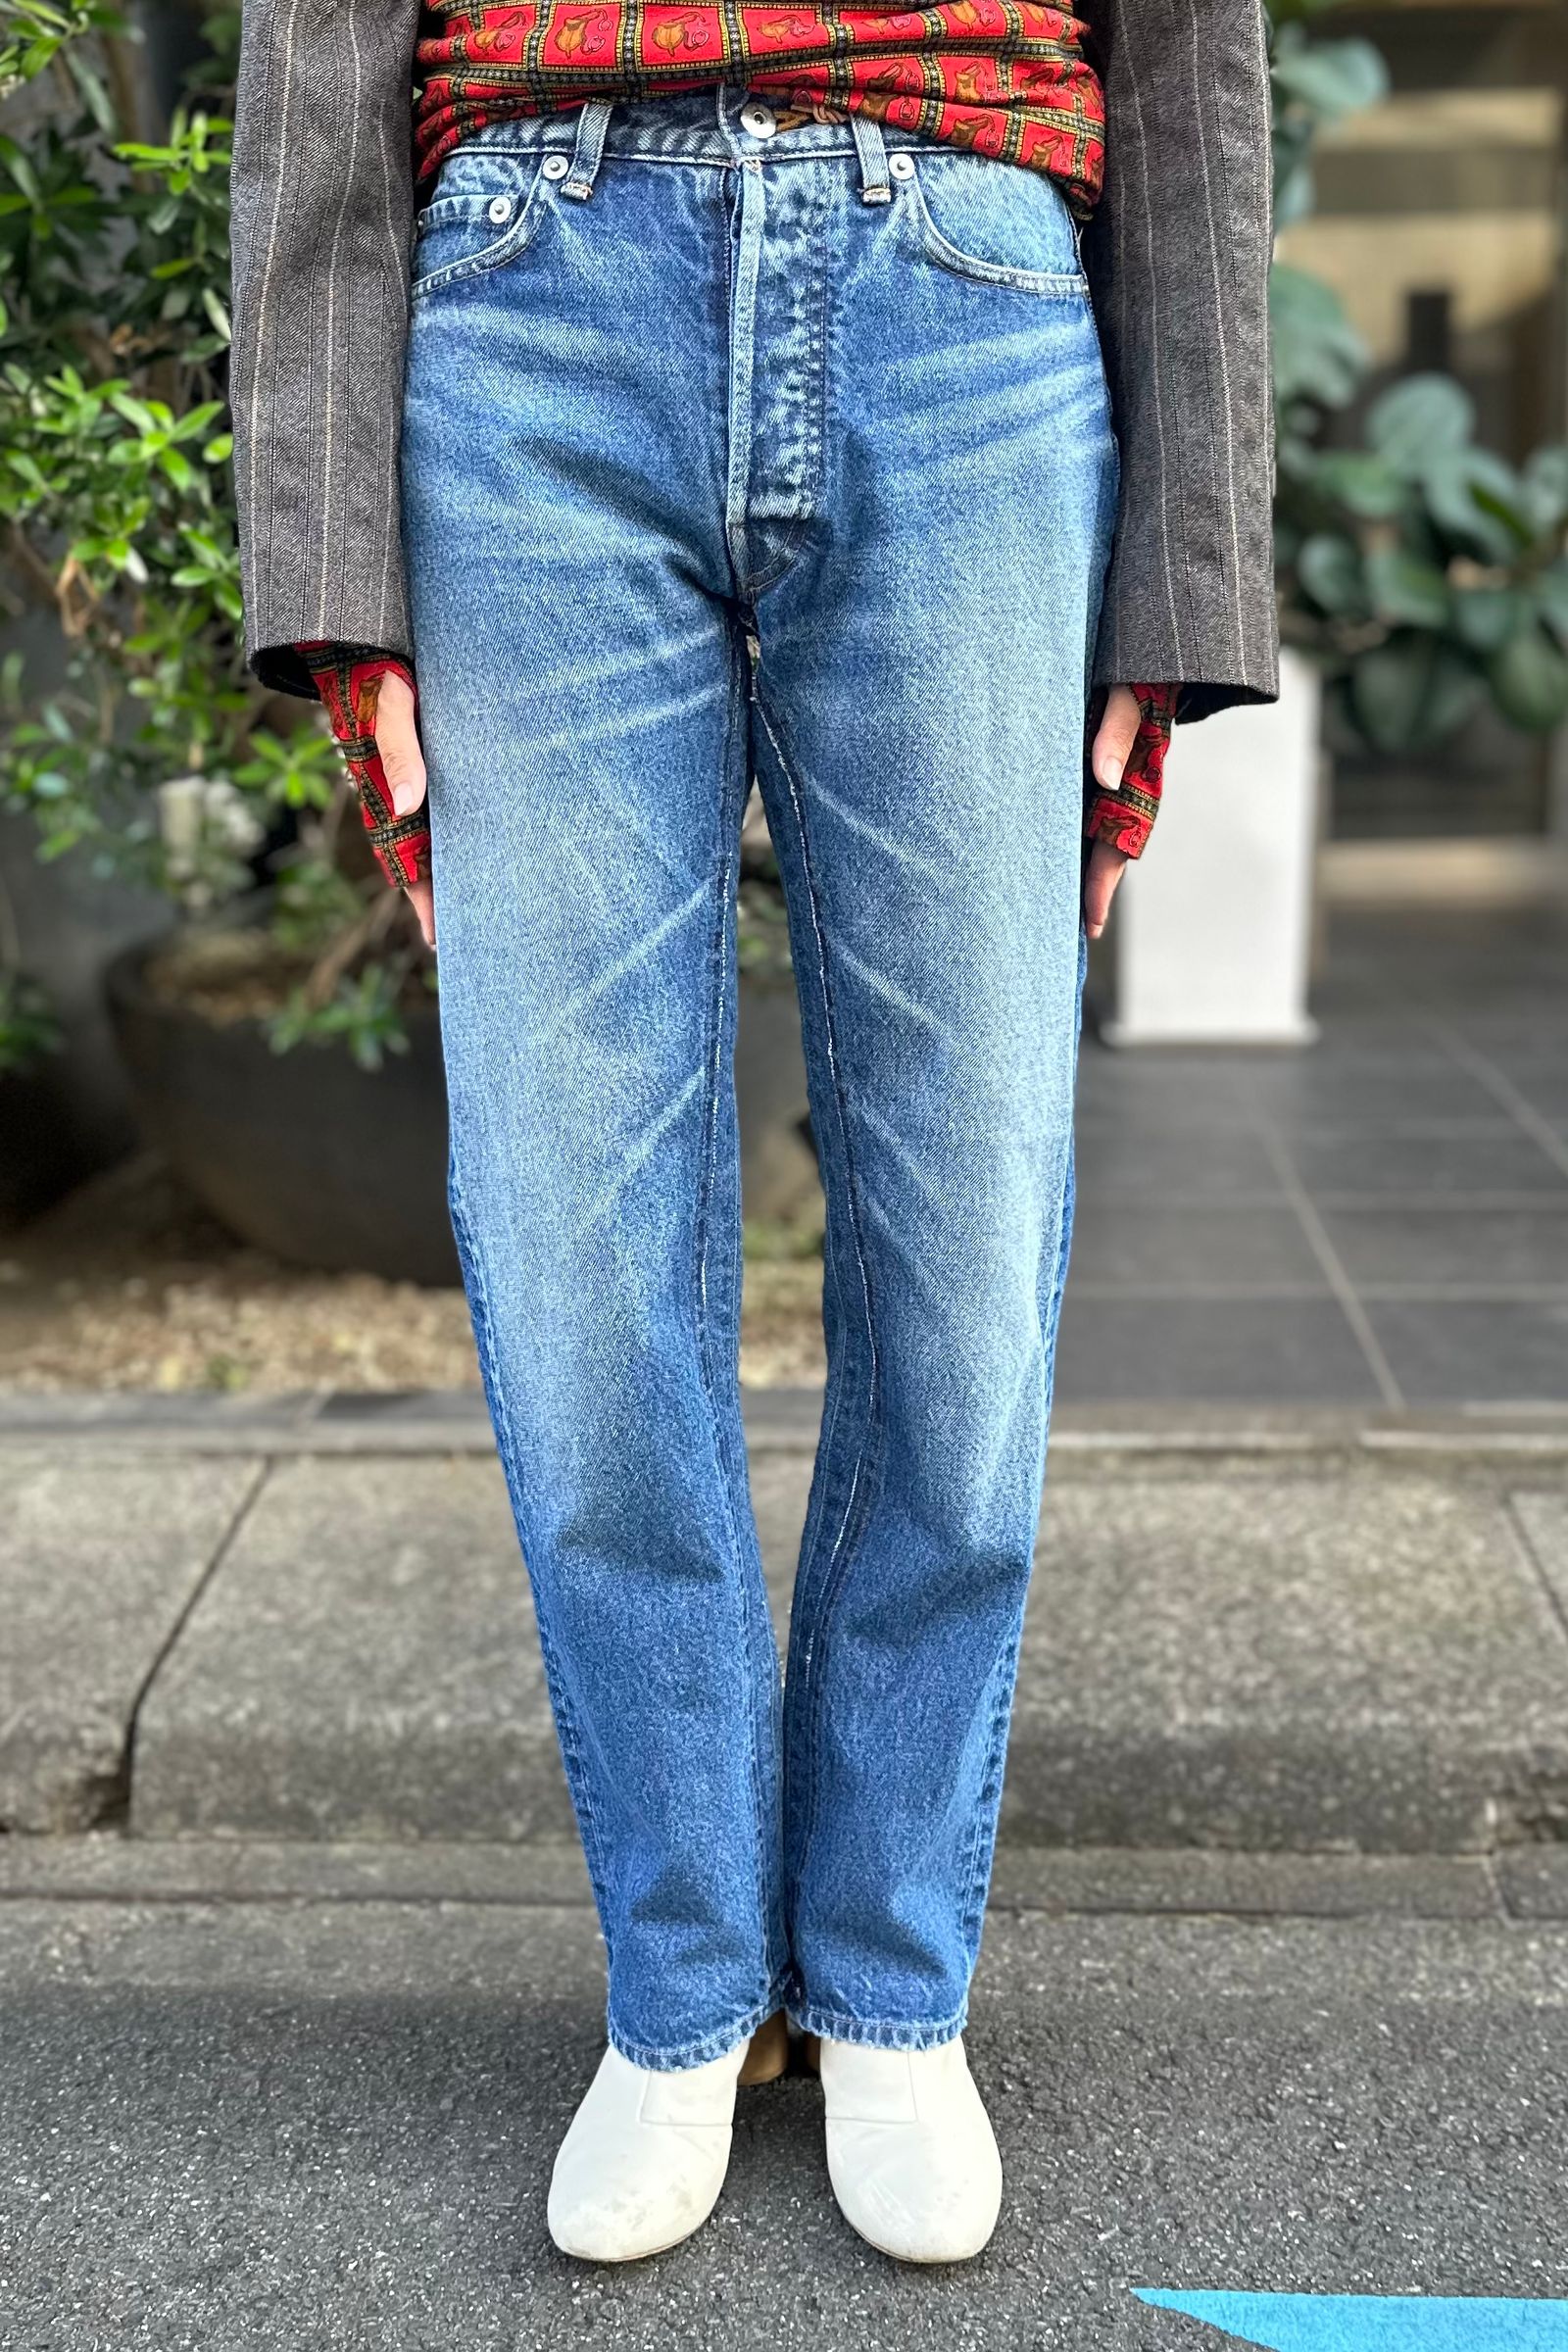 INSCRIRE - Straight Patch Different Denim -blue used- 23aw women 